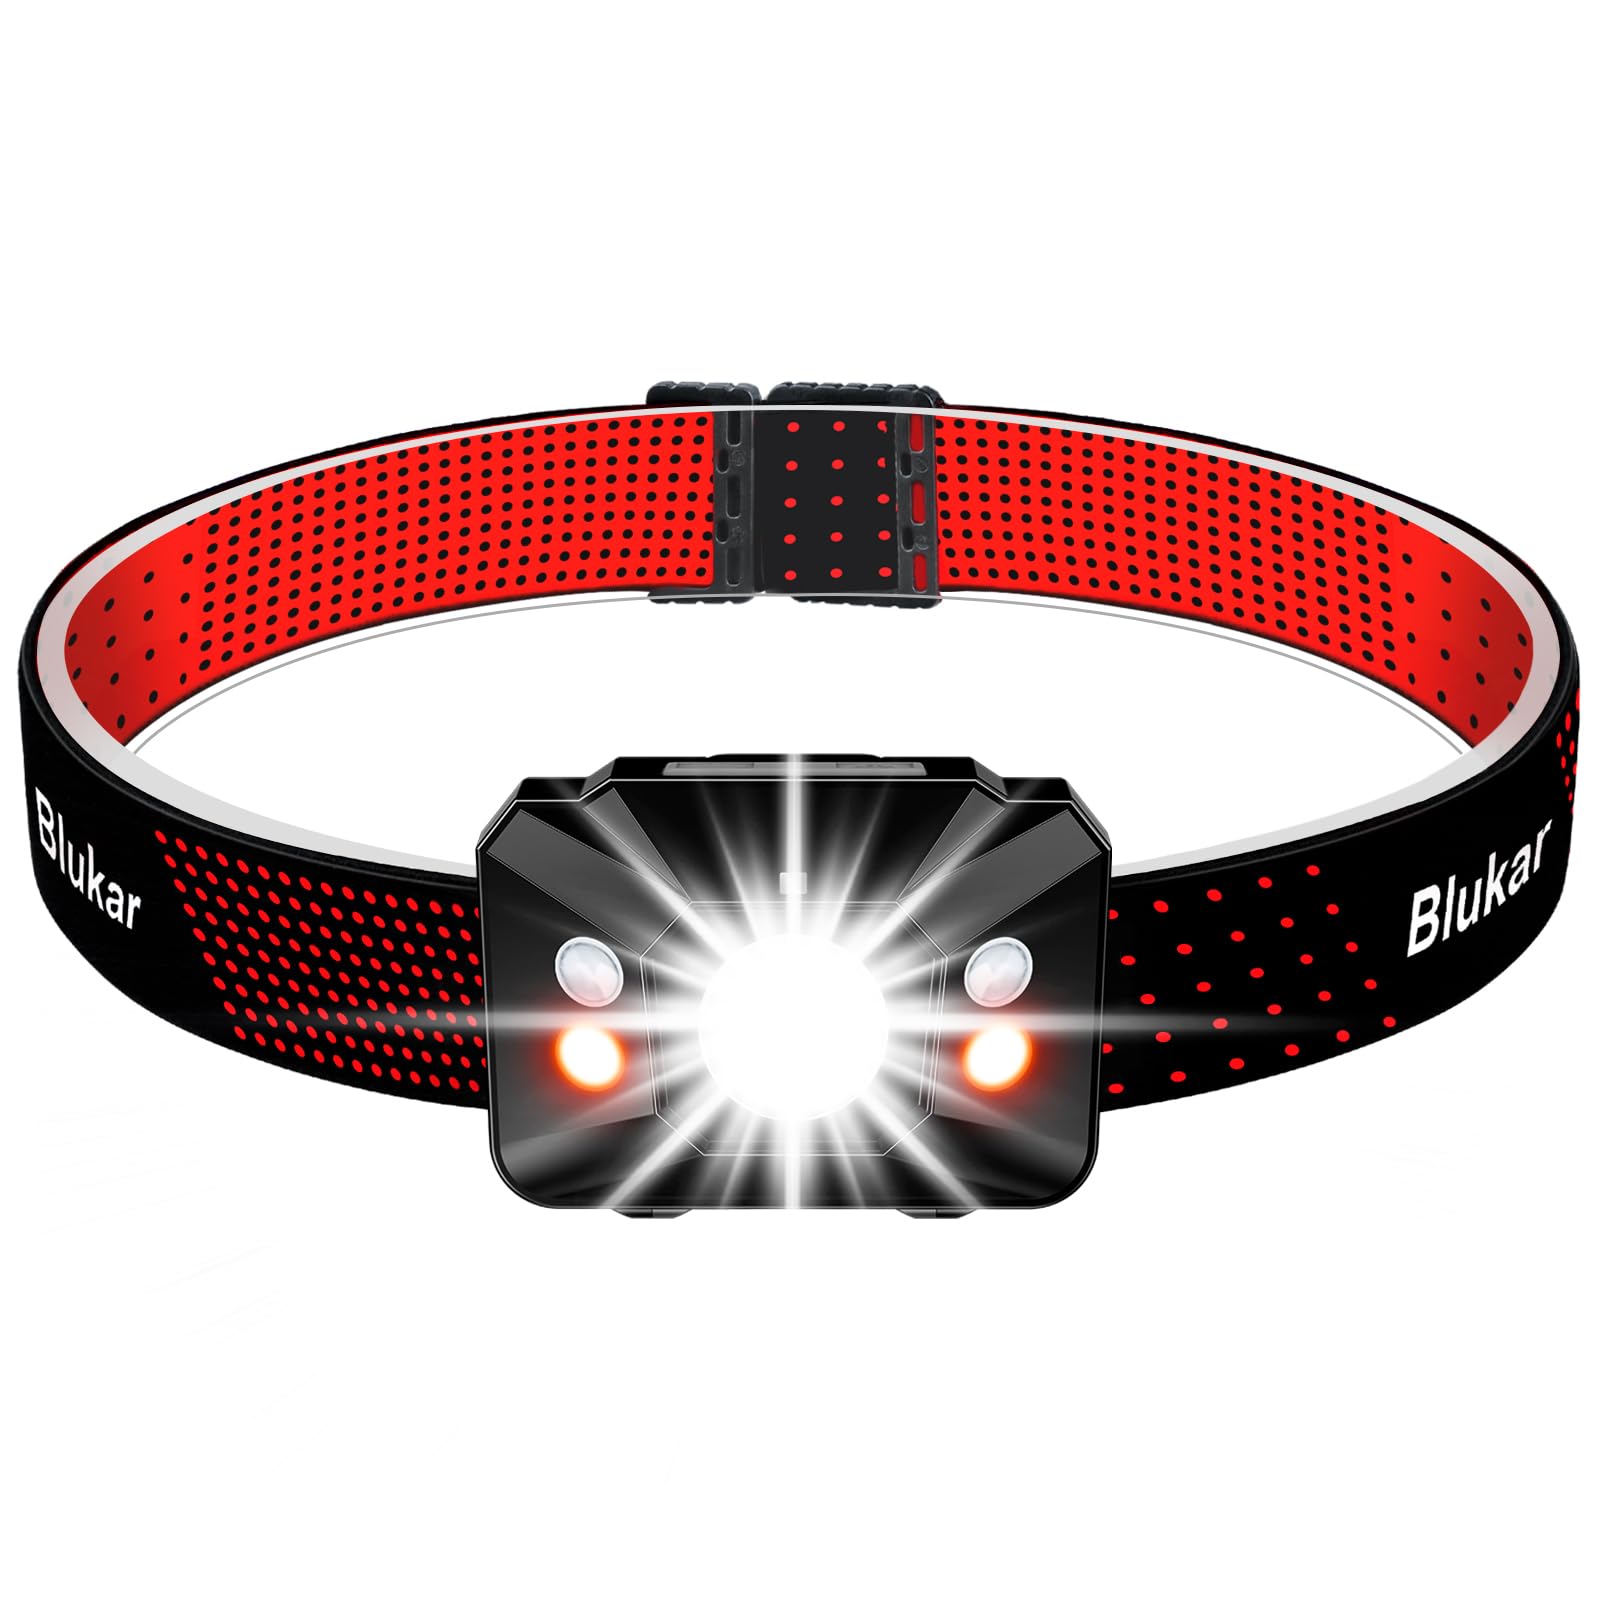 Blukar Head Torch Rechargeable, Super Bright LED Headlamp with Sensor Control & Red Light, 5 Lighting Modes, IPX5 Waterproof 30 Hrs Runtime for Power Cuts, Emergency, Running, Hiking etc. (K9122)